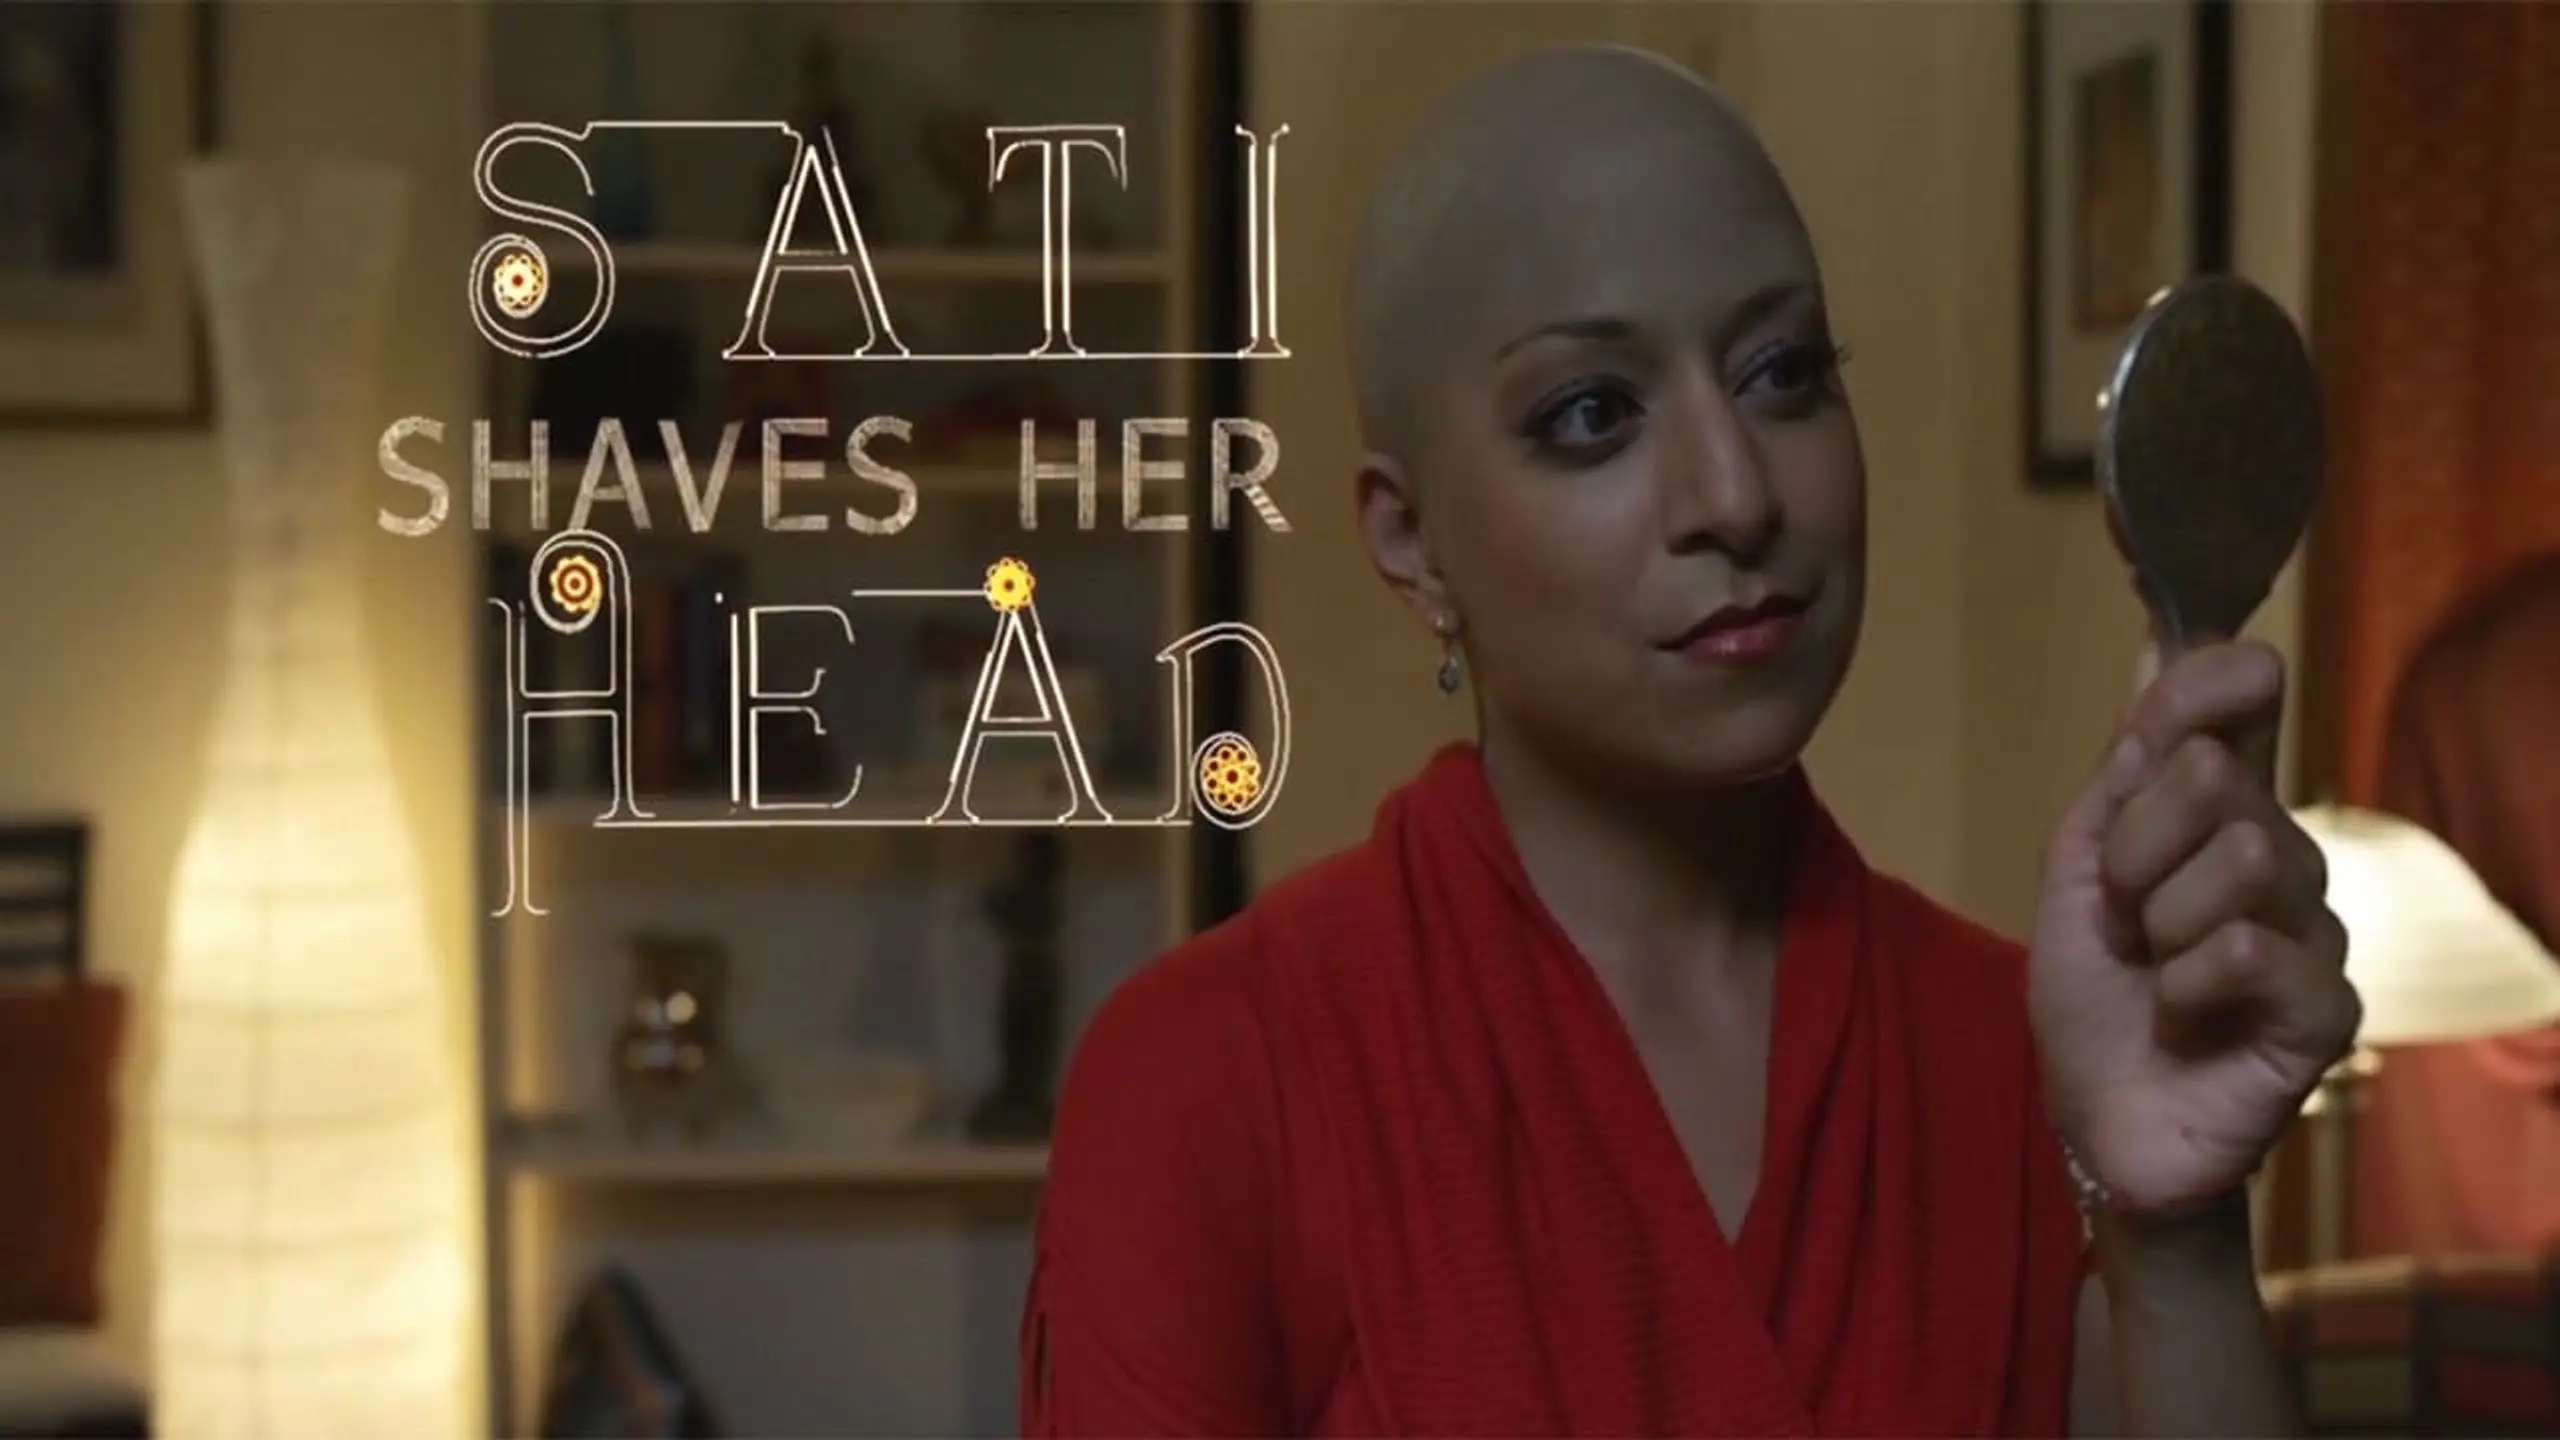 Sati Shaves Her Head